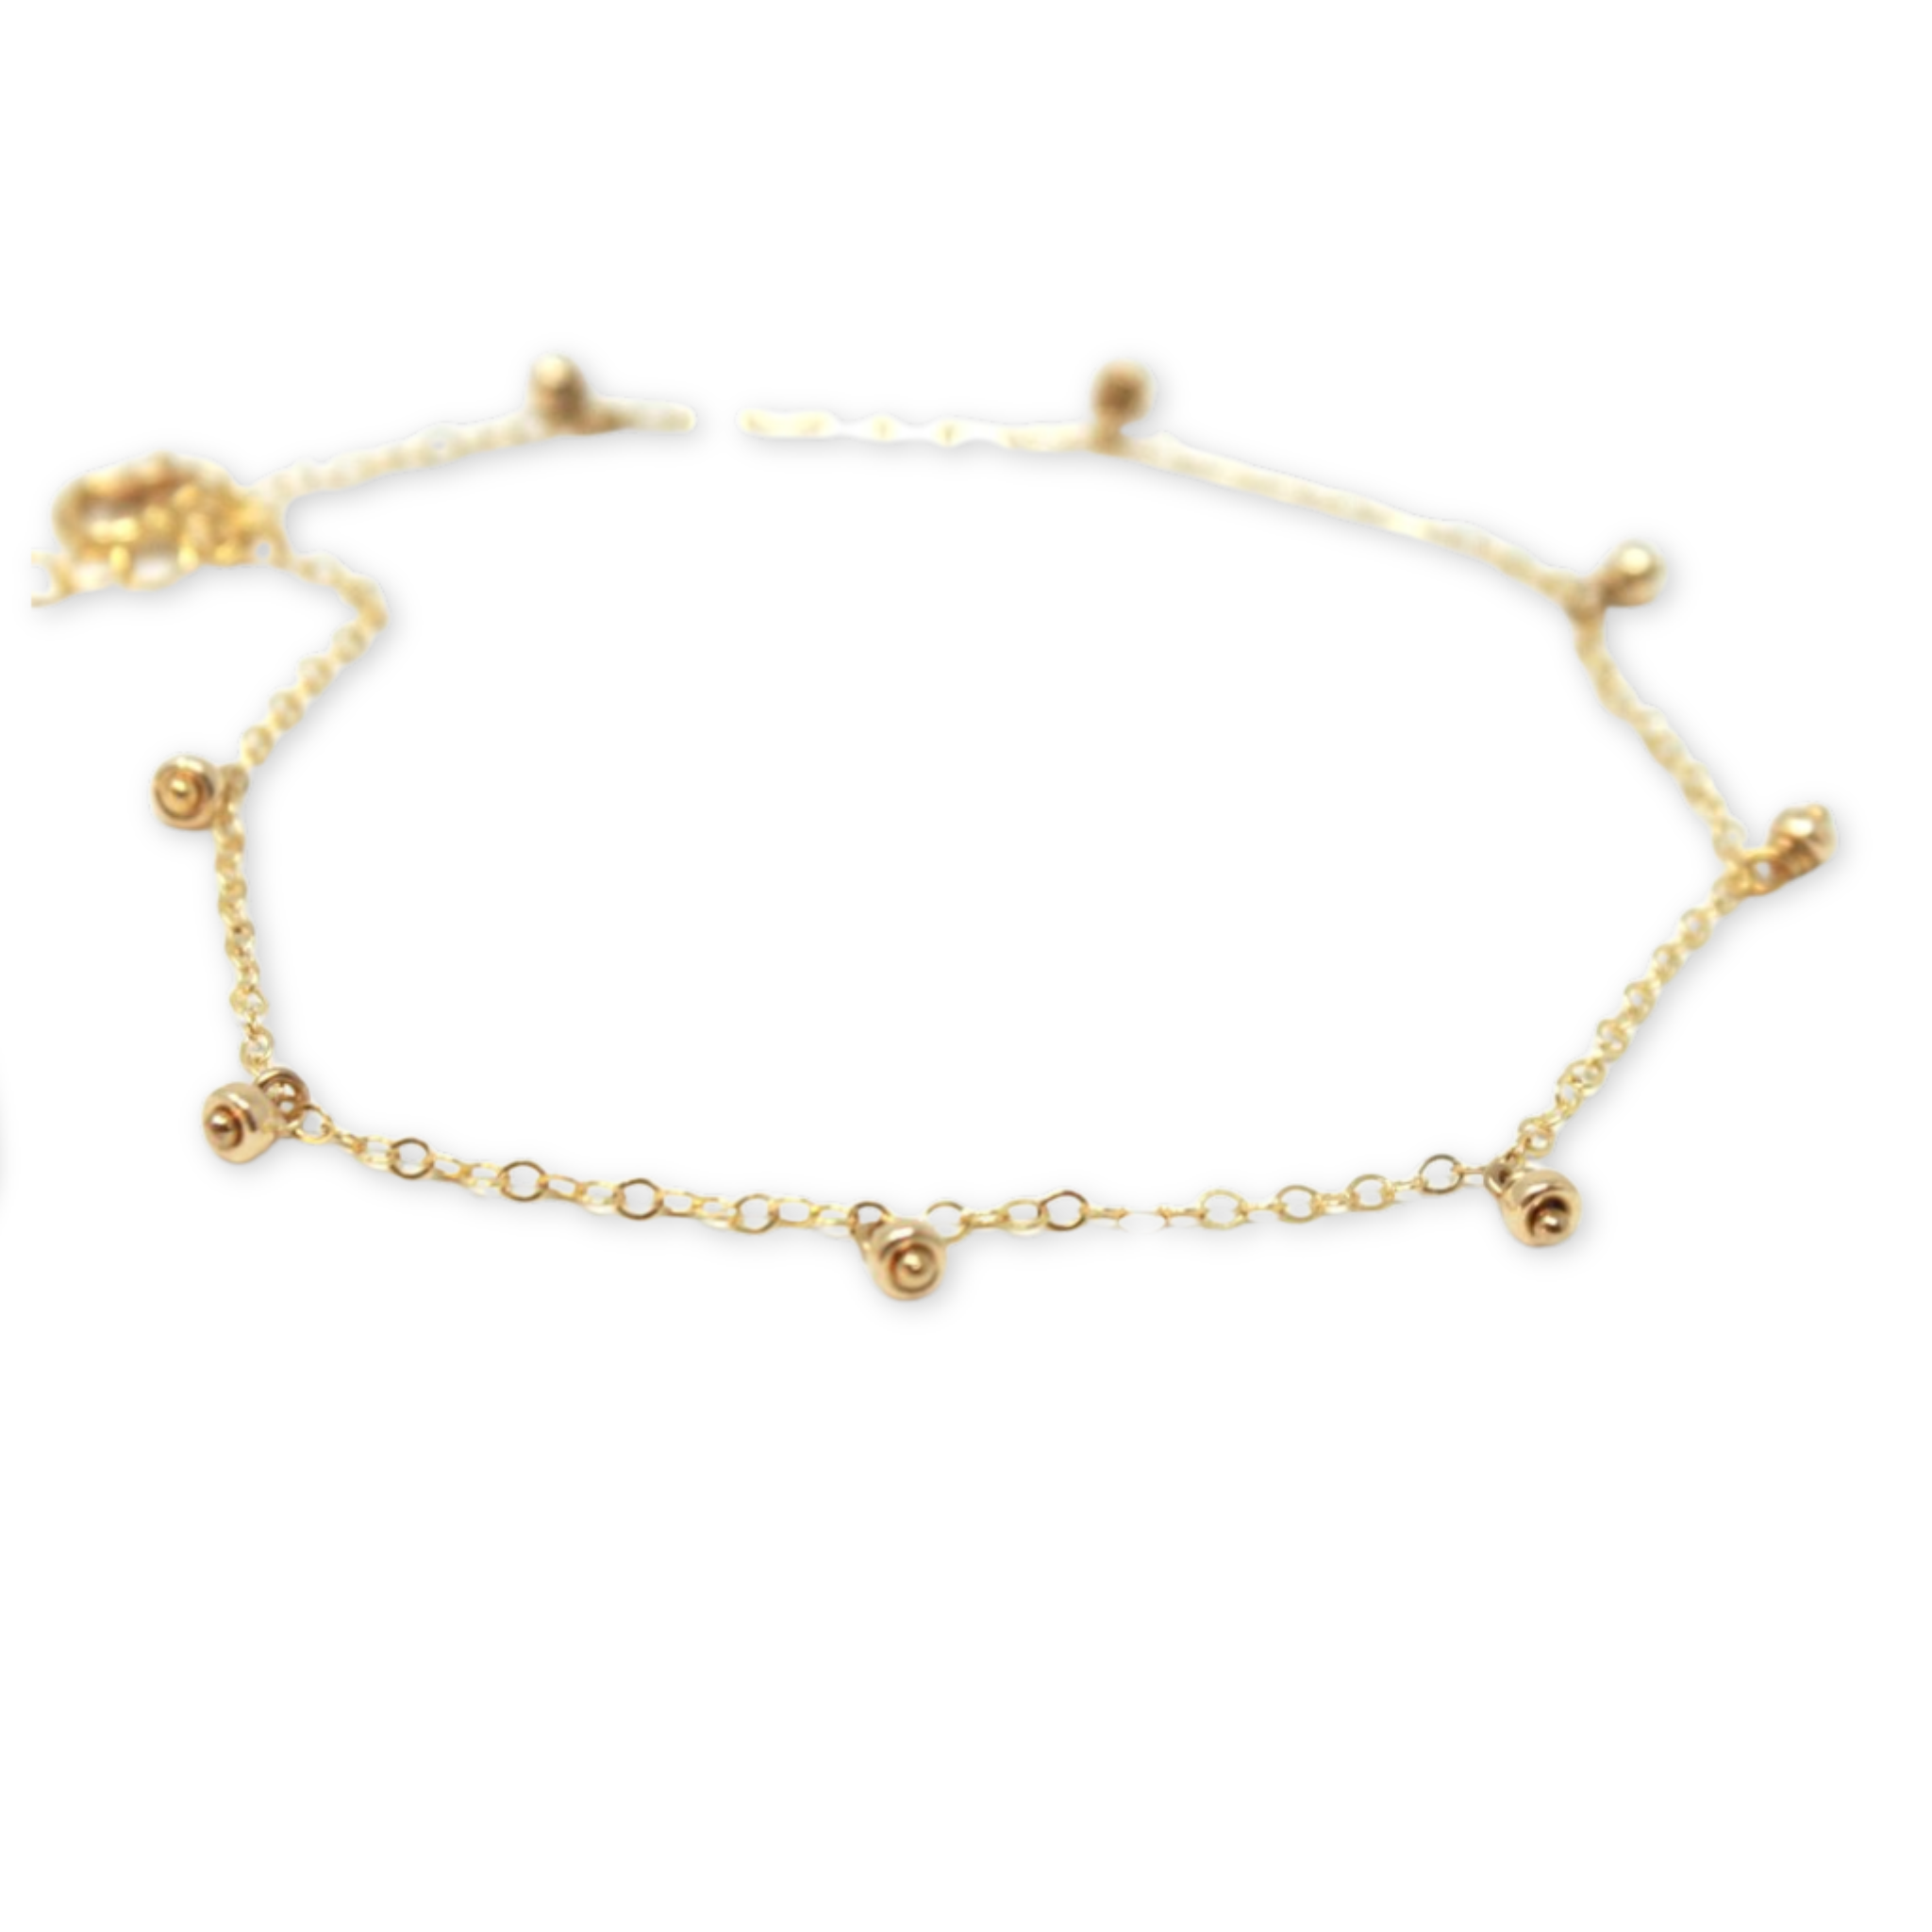 delicate chain anklet bracelet with small hanging gold beads